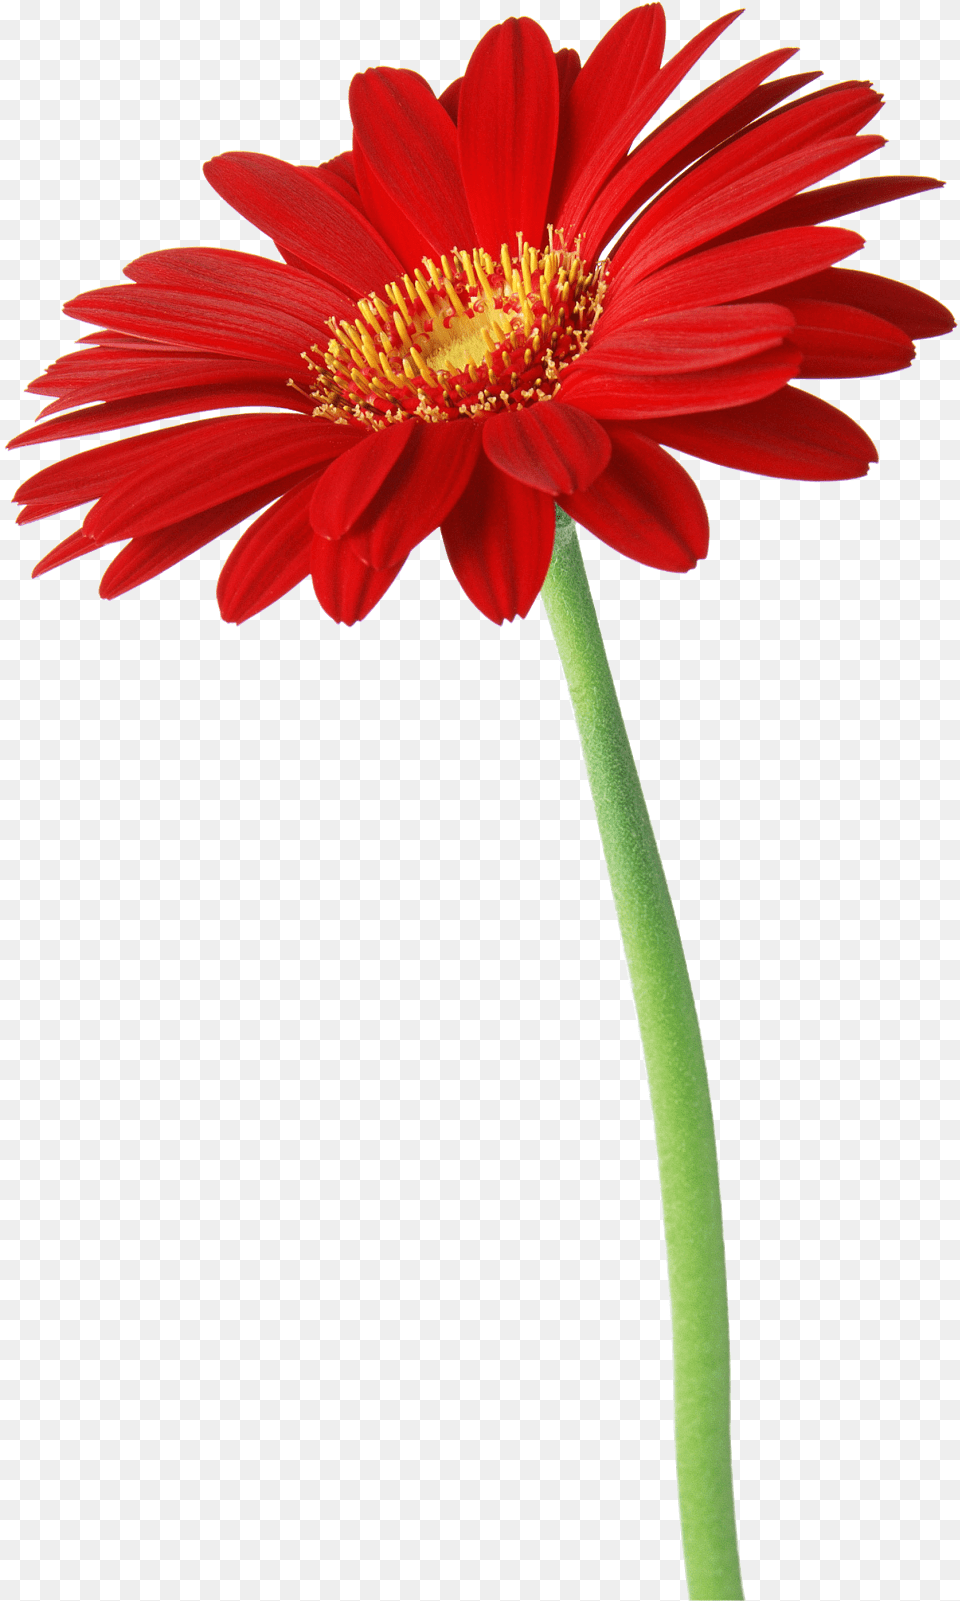 Flower Clipart Natural Shrubs Free Clip Art Of Natural Flower, Anther, Daisy, Plant, Dahlia Png